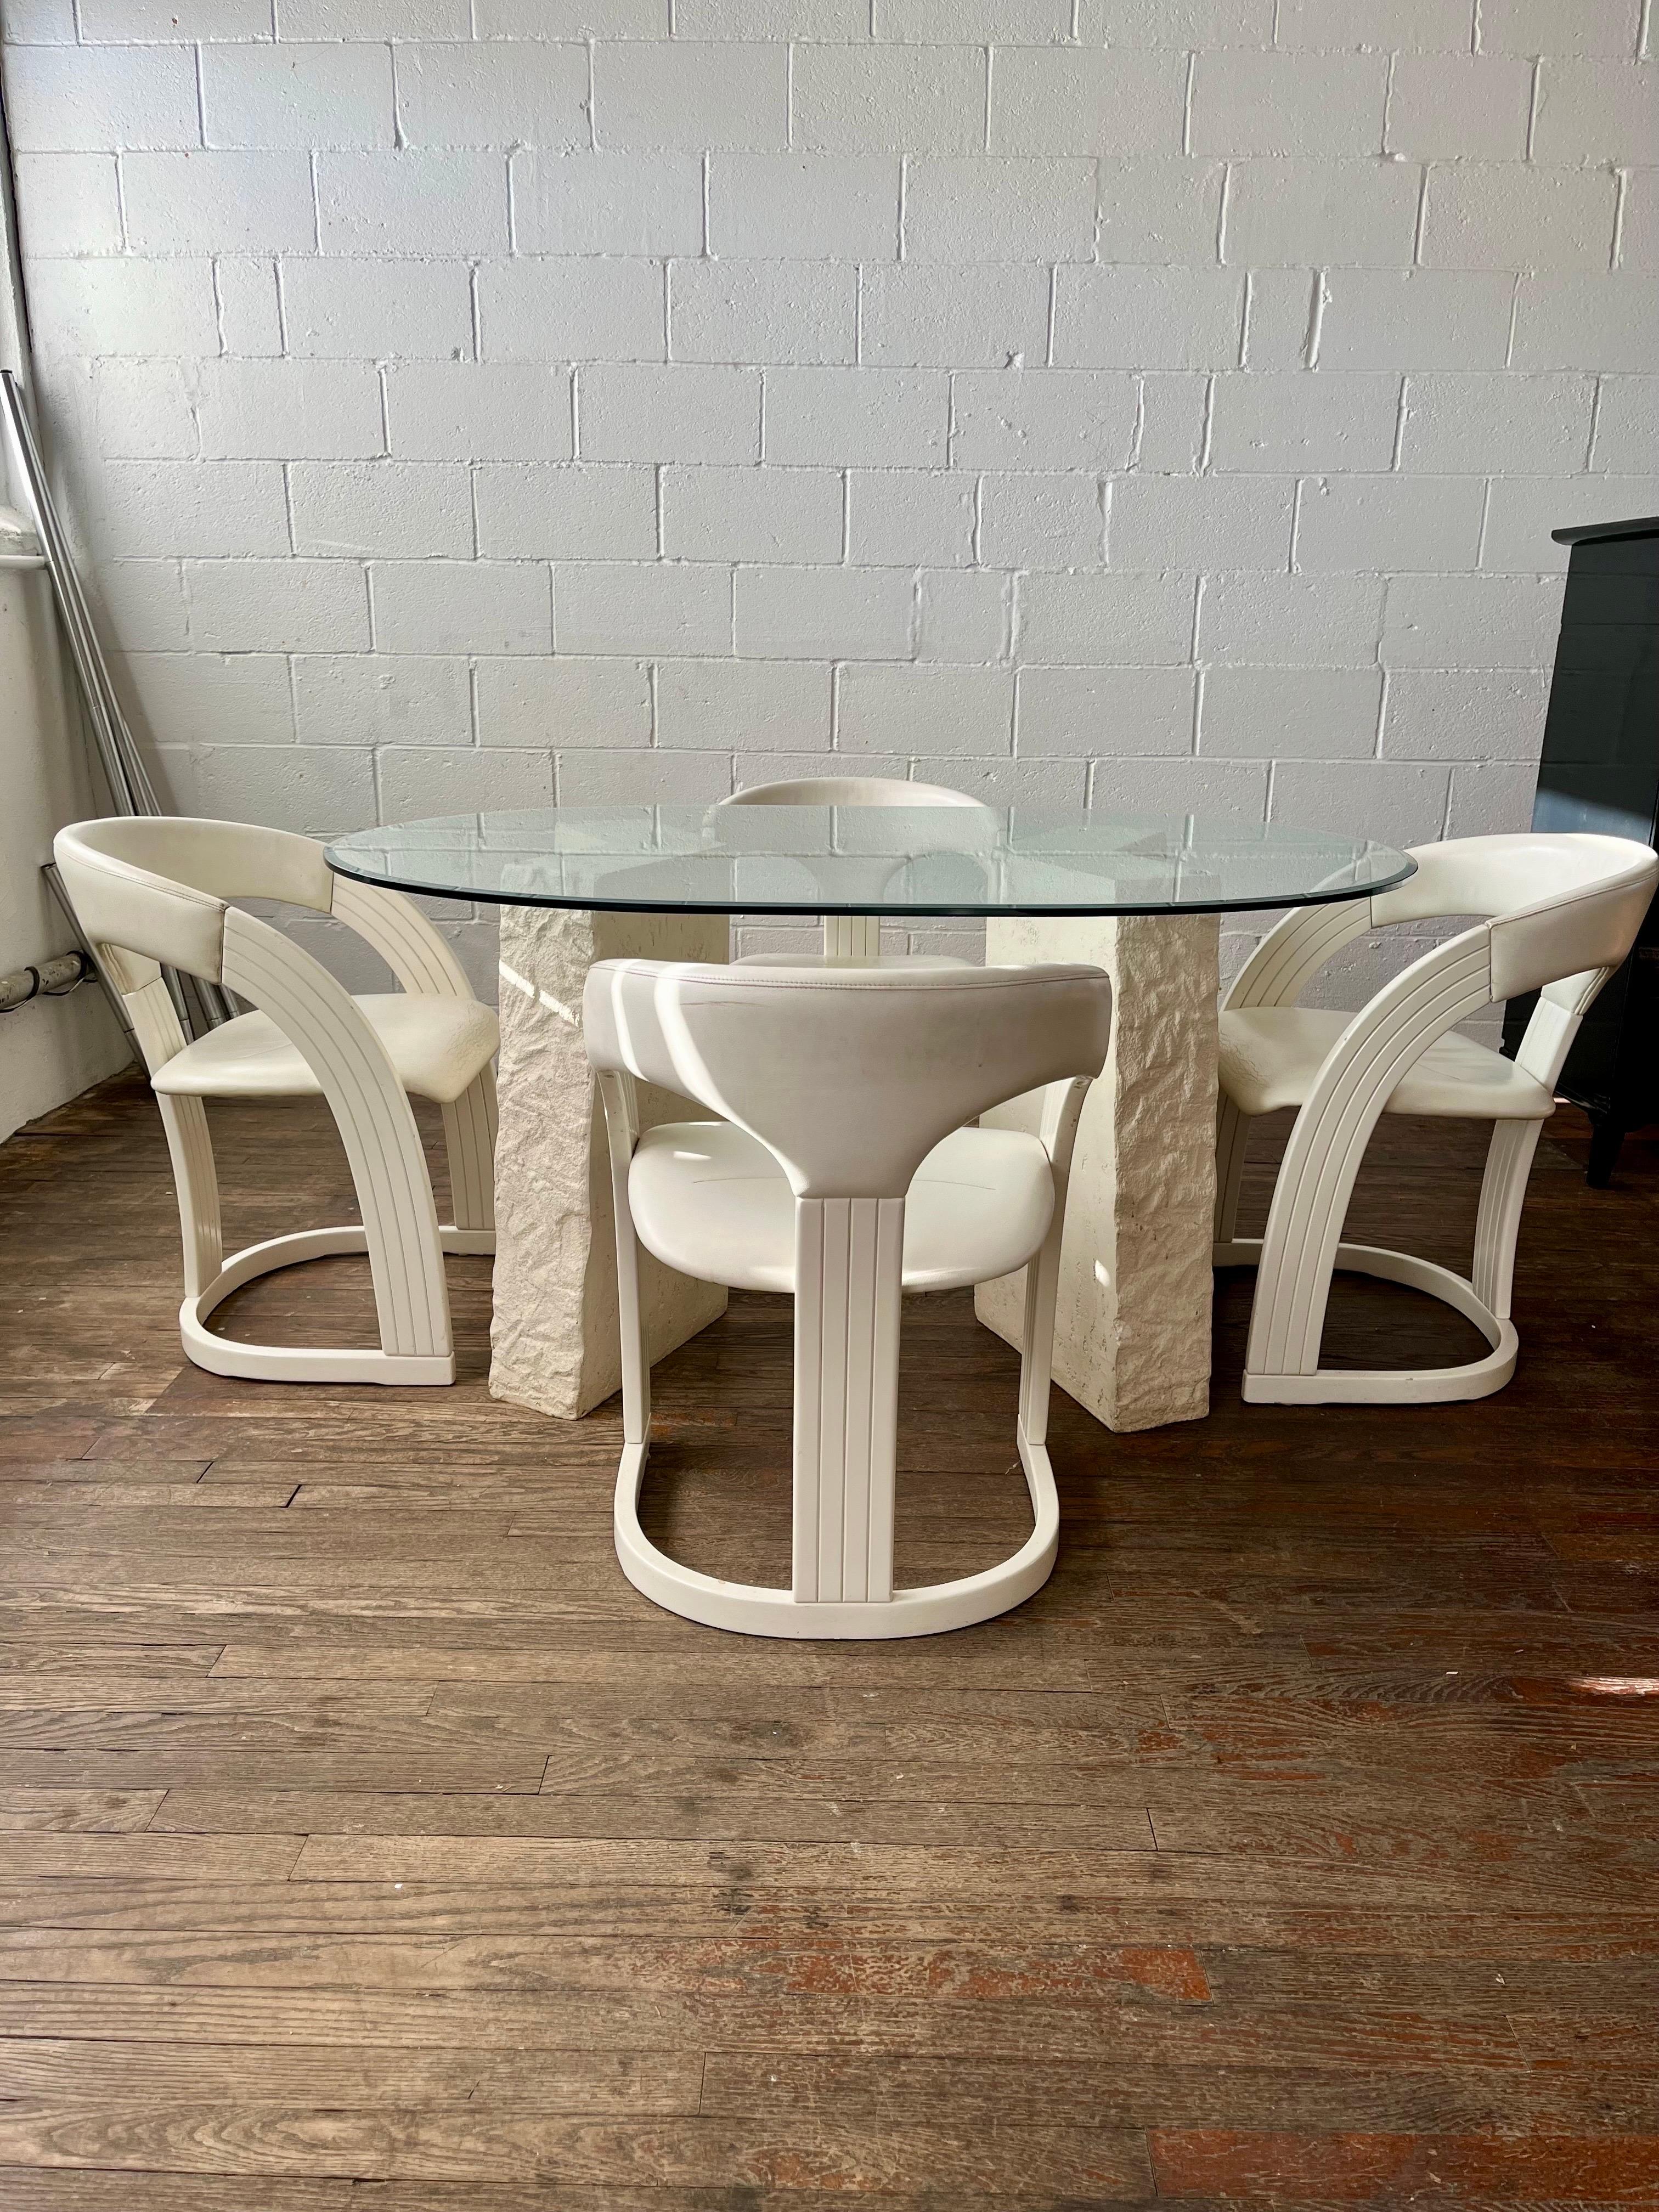 Fantastic post-modern dining table and 4 lacquer and leather dining chairs made in Italy. 2 tapered geometric V shaped base legs. Thick beveled glass top. Chairs have gentle sloping design with leather seat and back. Labeled made in Italy. Has a